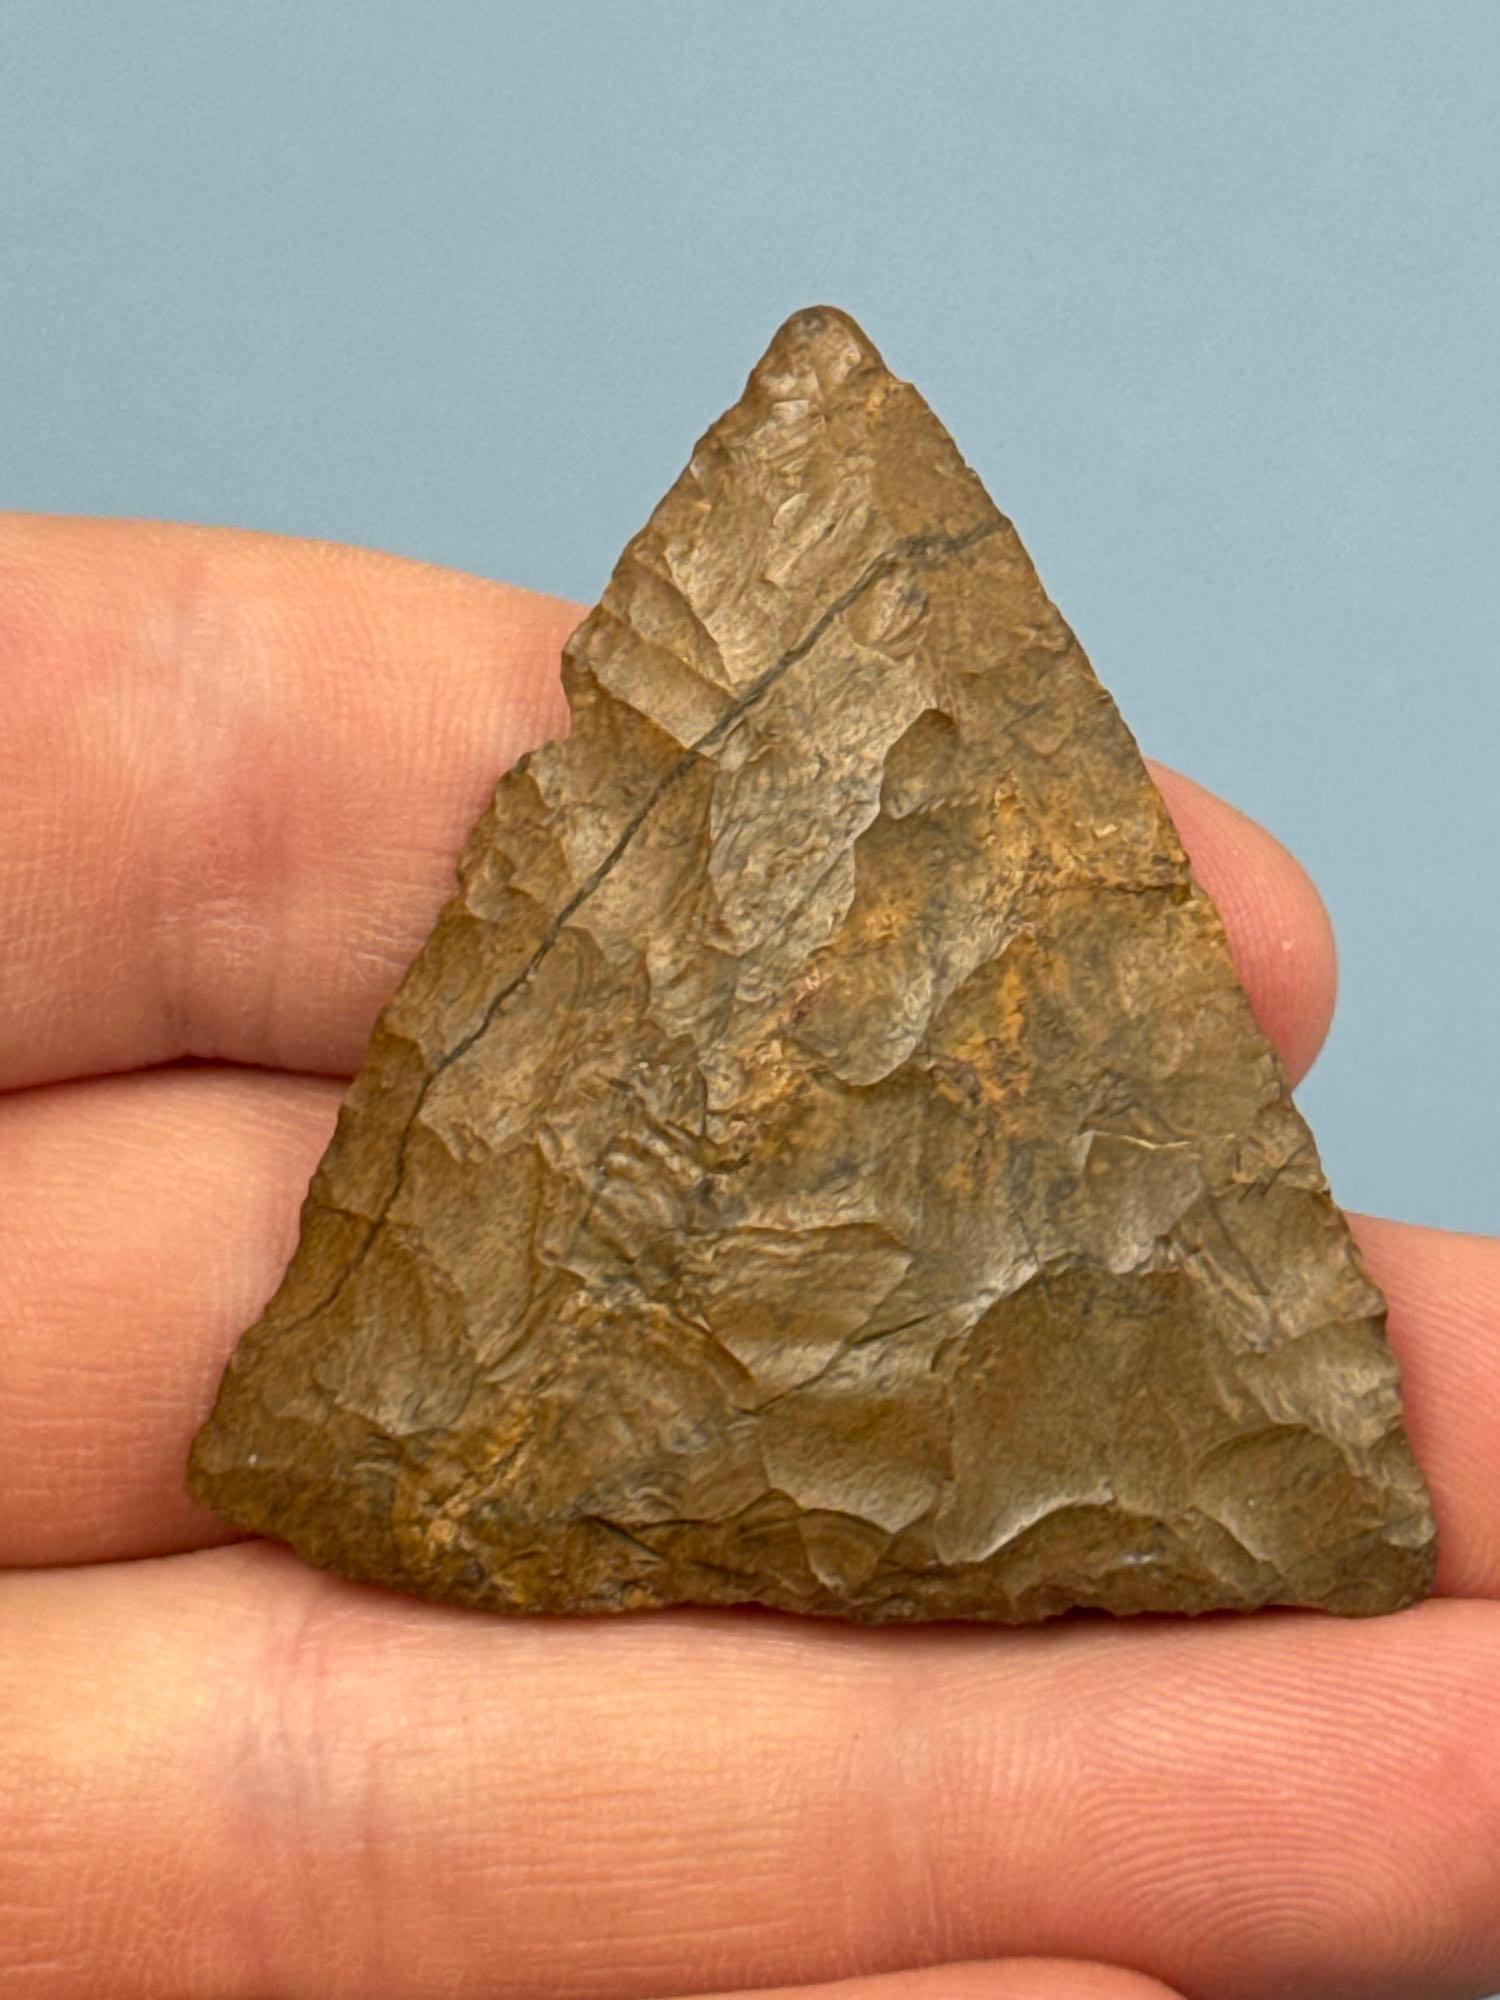 Large 2" Jasper Triangle, Found at Greenlane between Springtown and Quakertown, PA, Ex: Lemaster Col